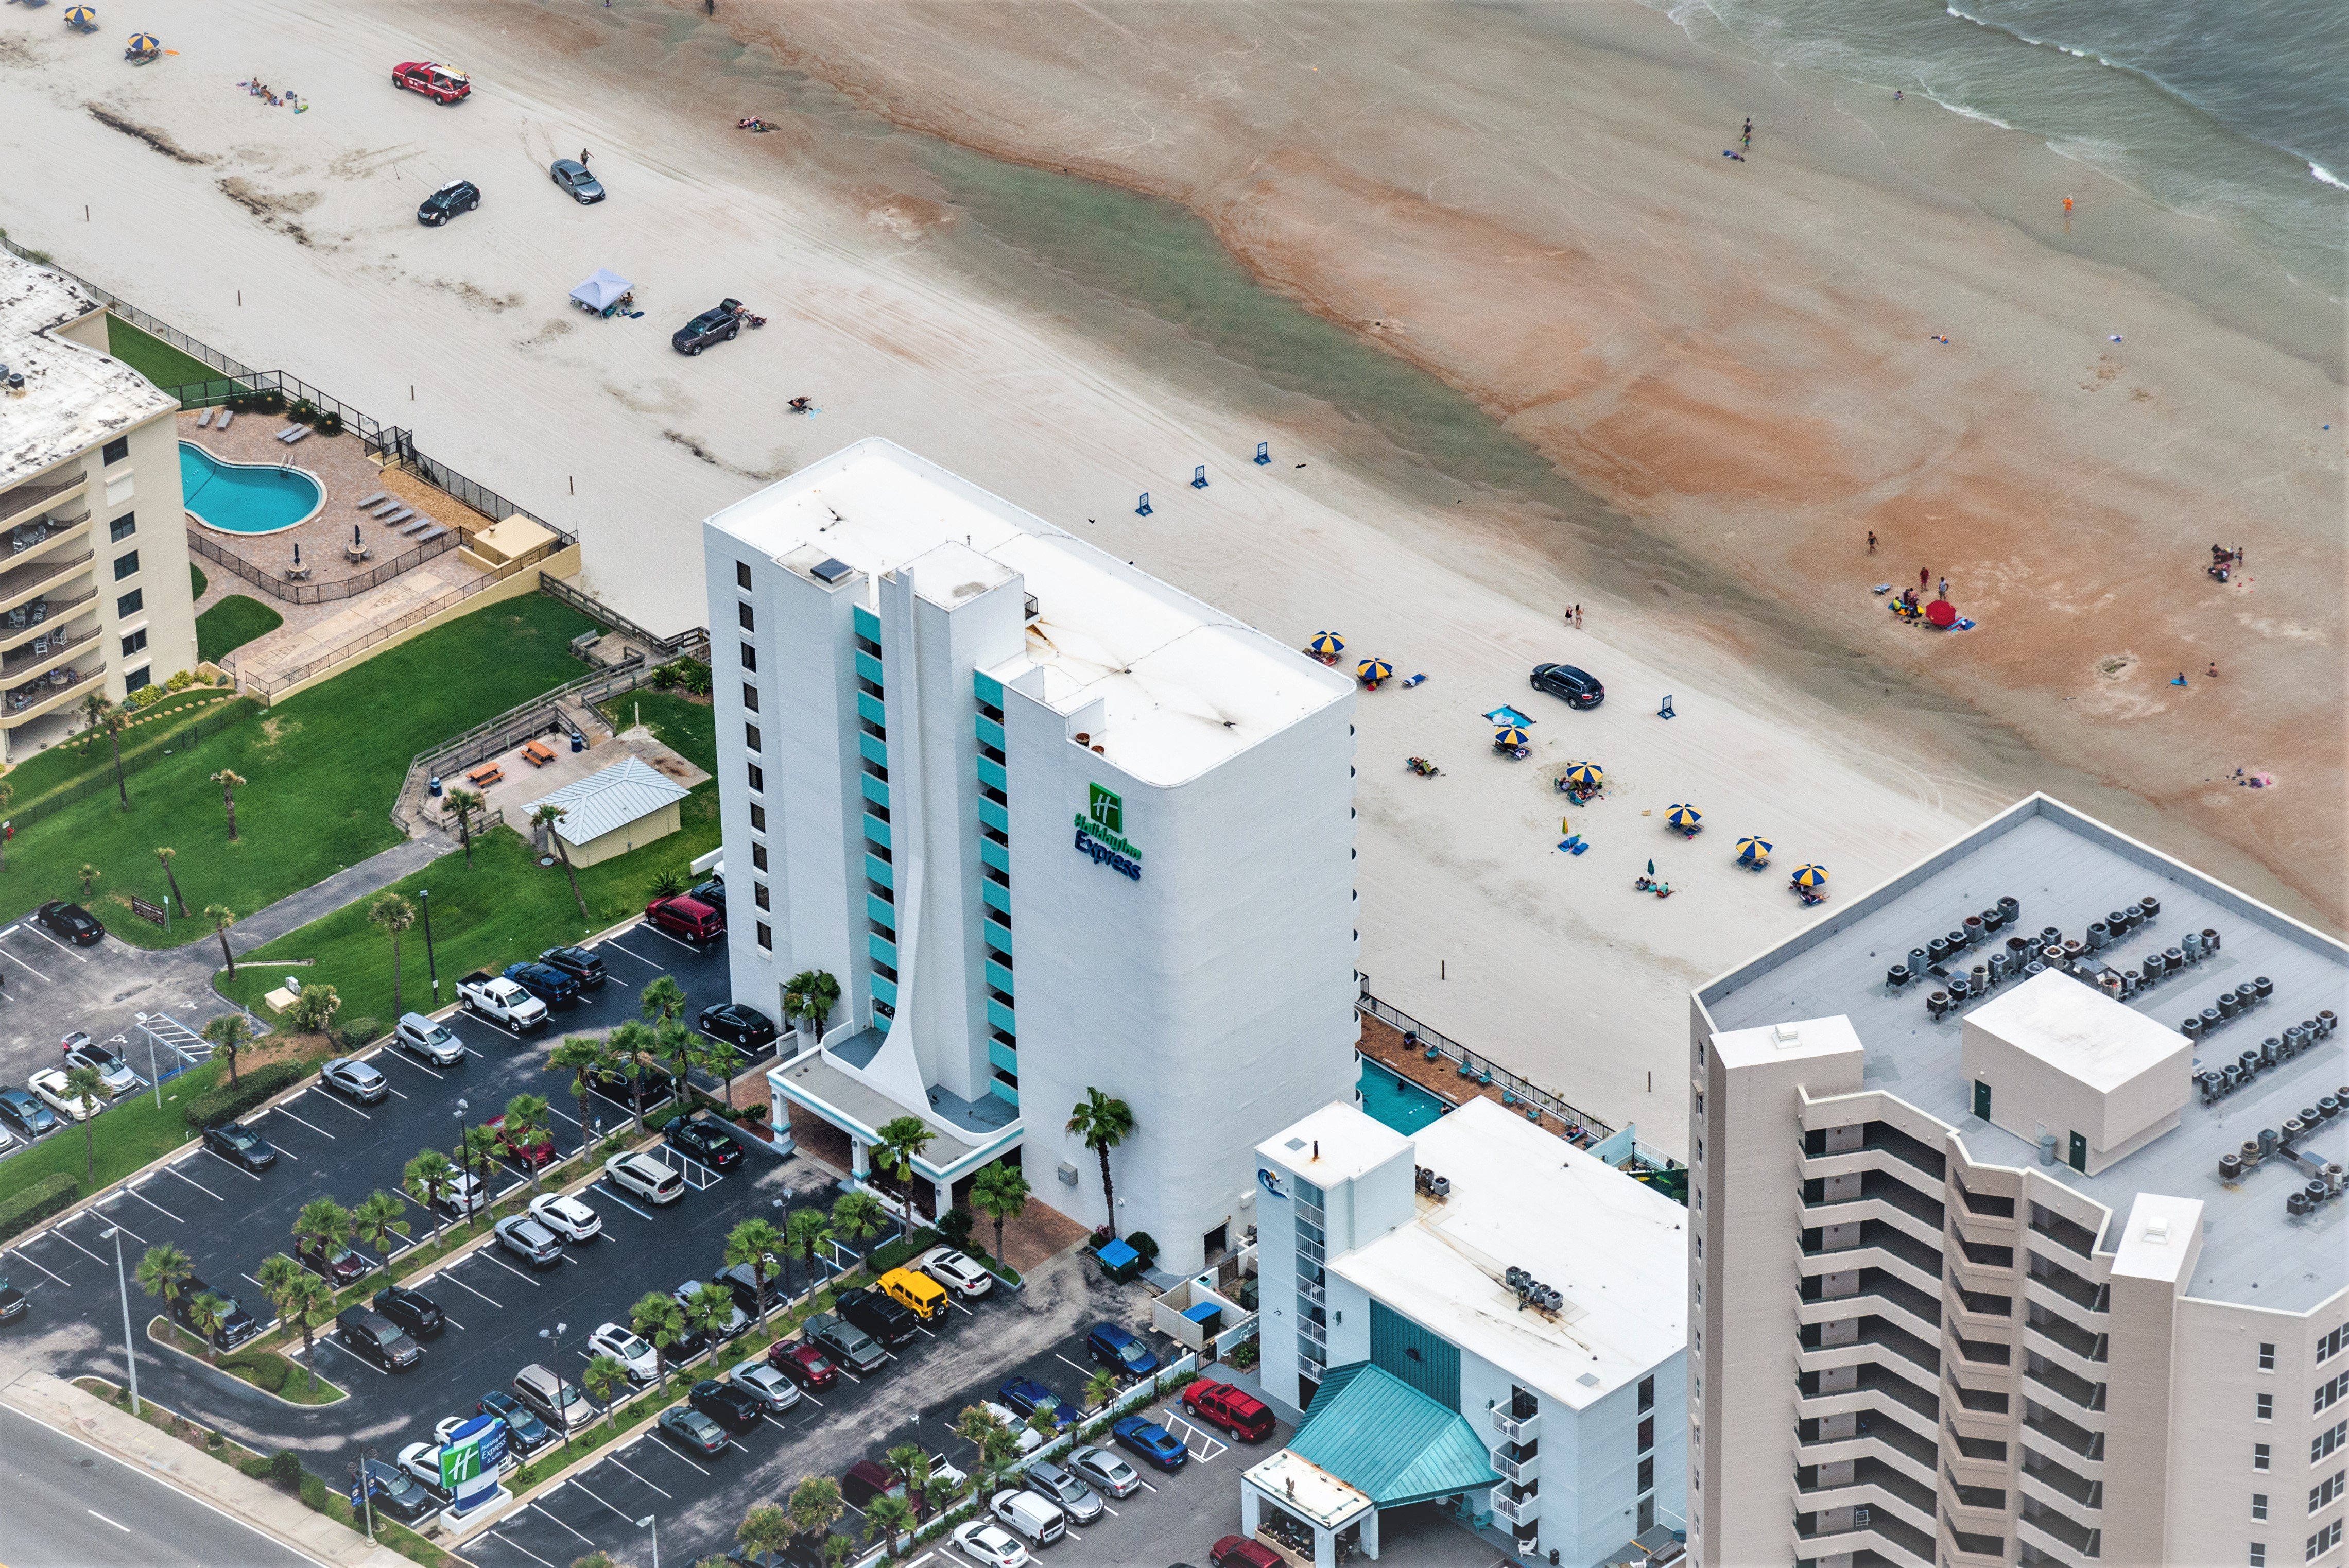 Enjoy our beachfront location with ocean views from all rooms!